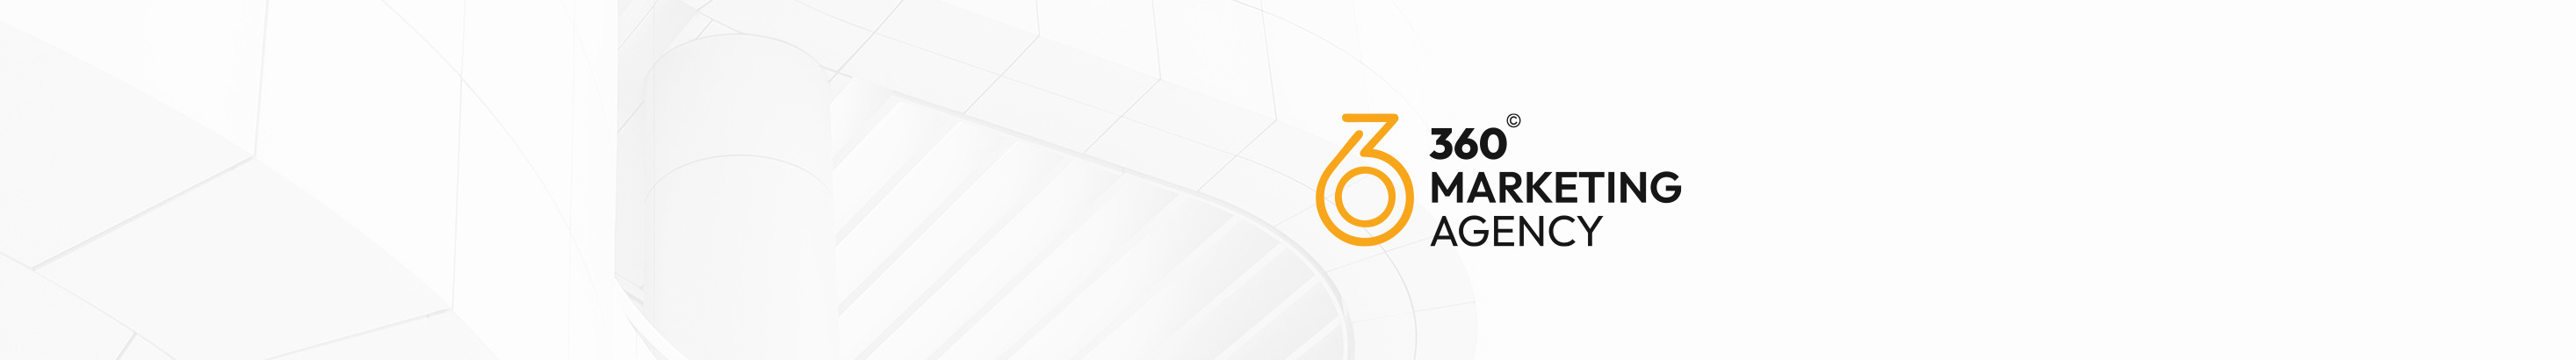 360 Marketing Agency's profile banner